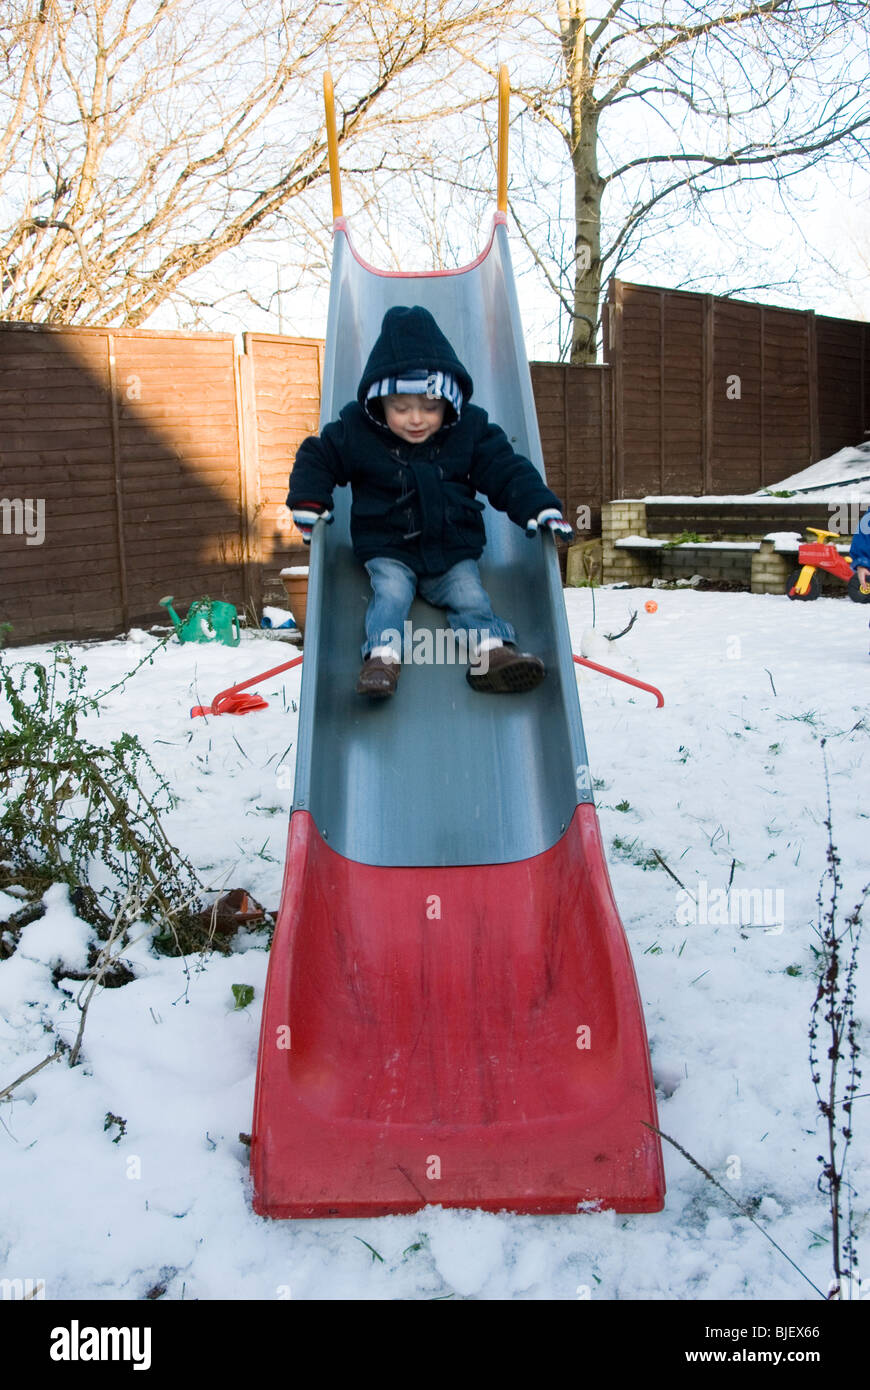 Little Boy Toddler Playing on a Slide in Back Garden in Snow, Christmas Day, Sheffield 2009 Stock Photo